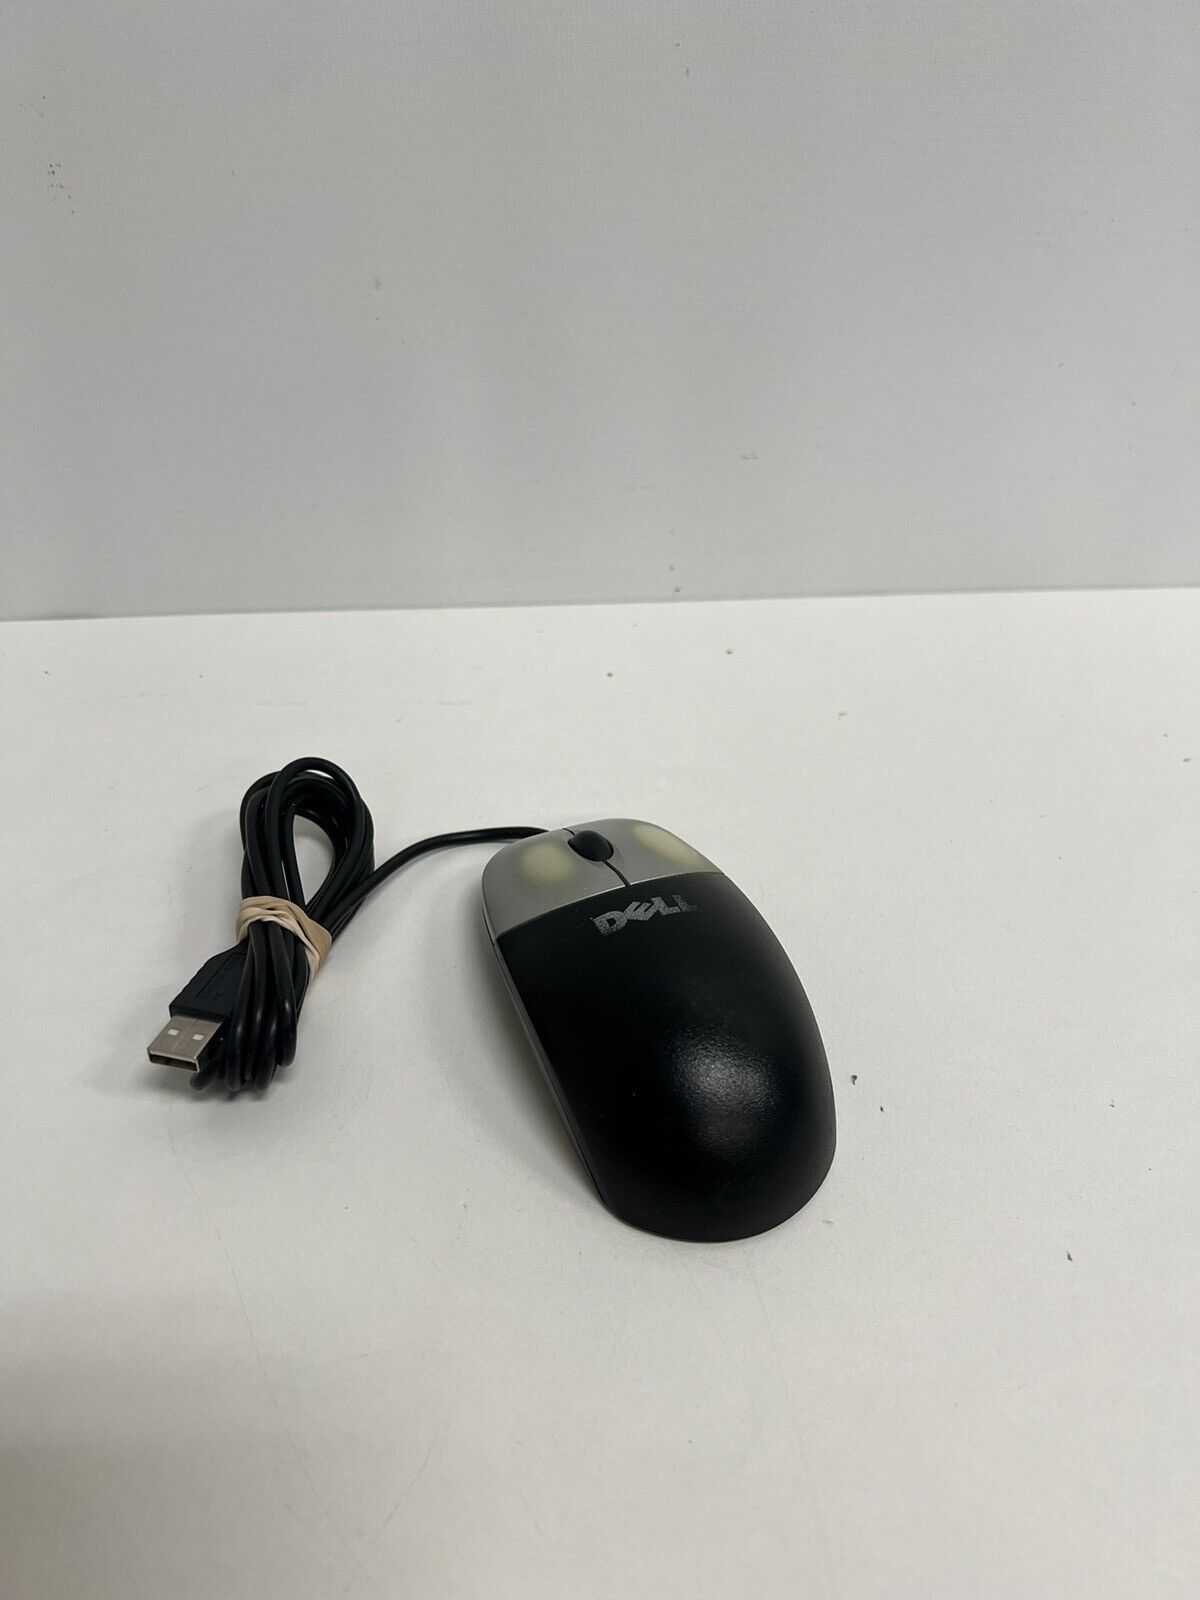 Vintage Dell USB Optical Mouse M-UAN DEL1 Clean Tested - Very Good CONDITION